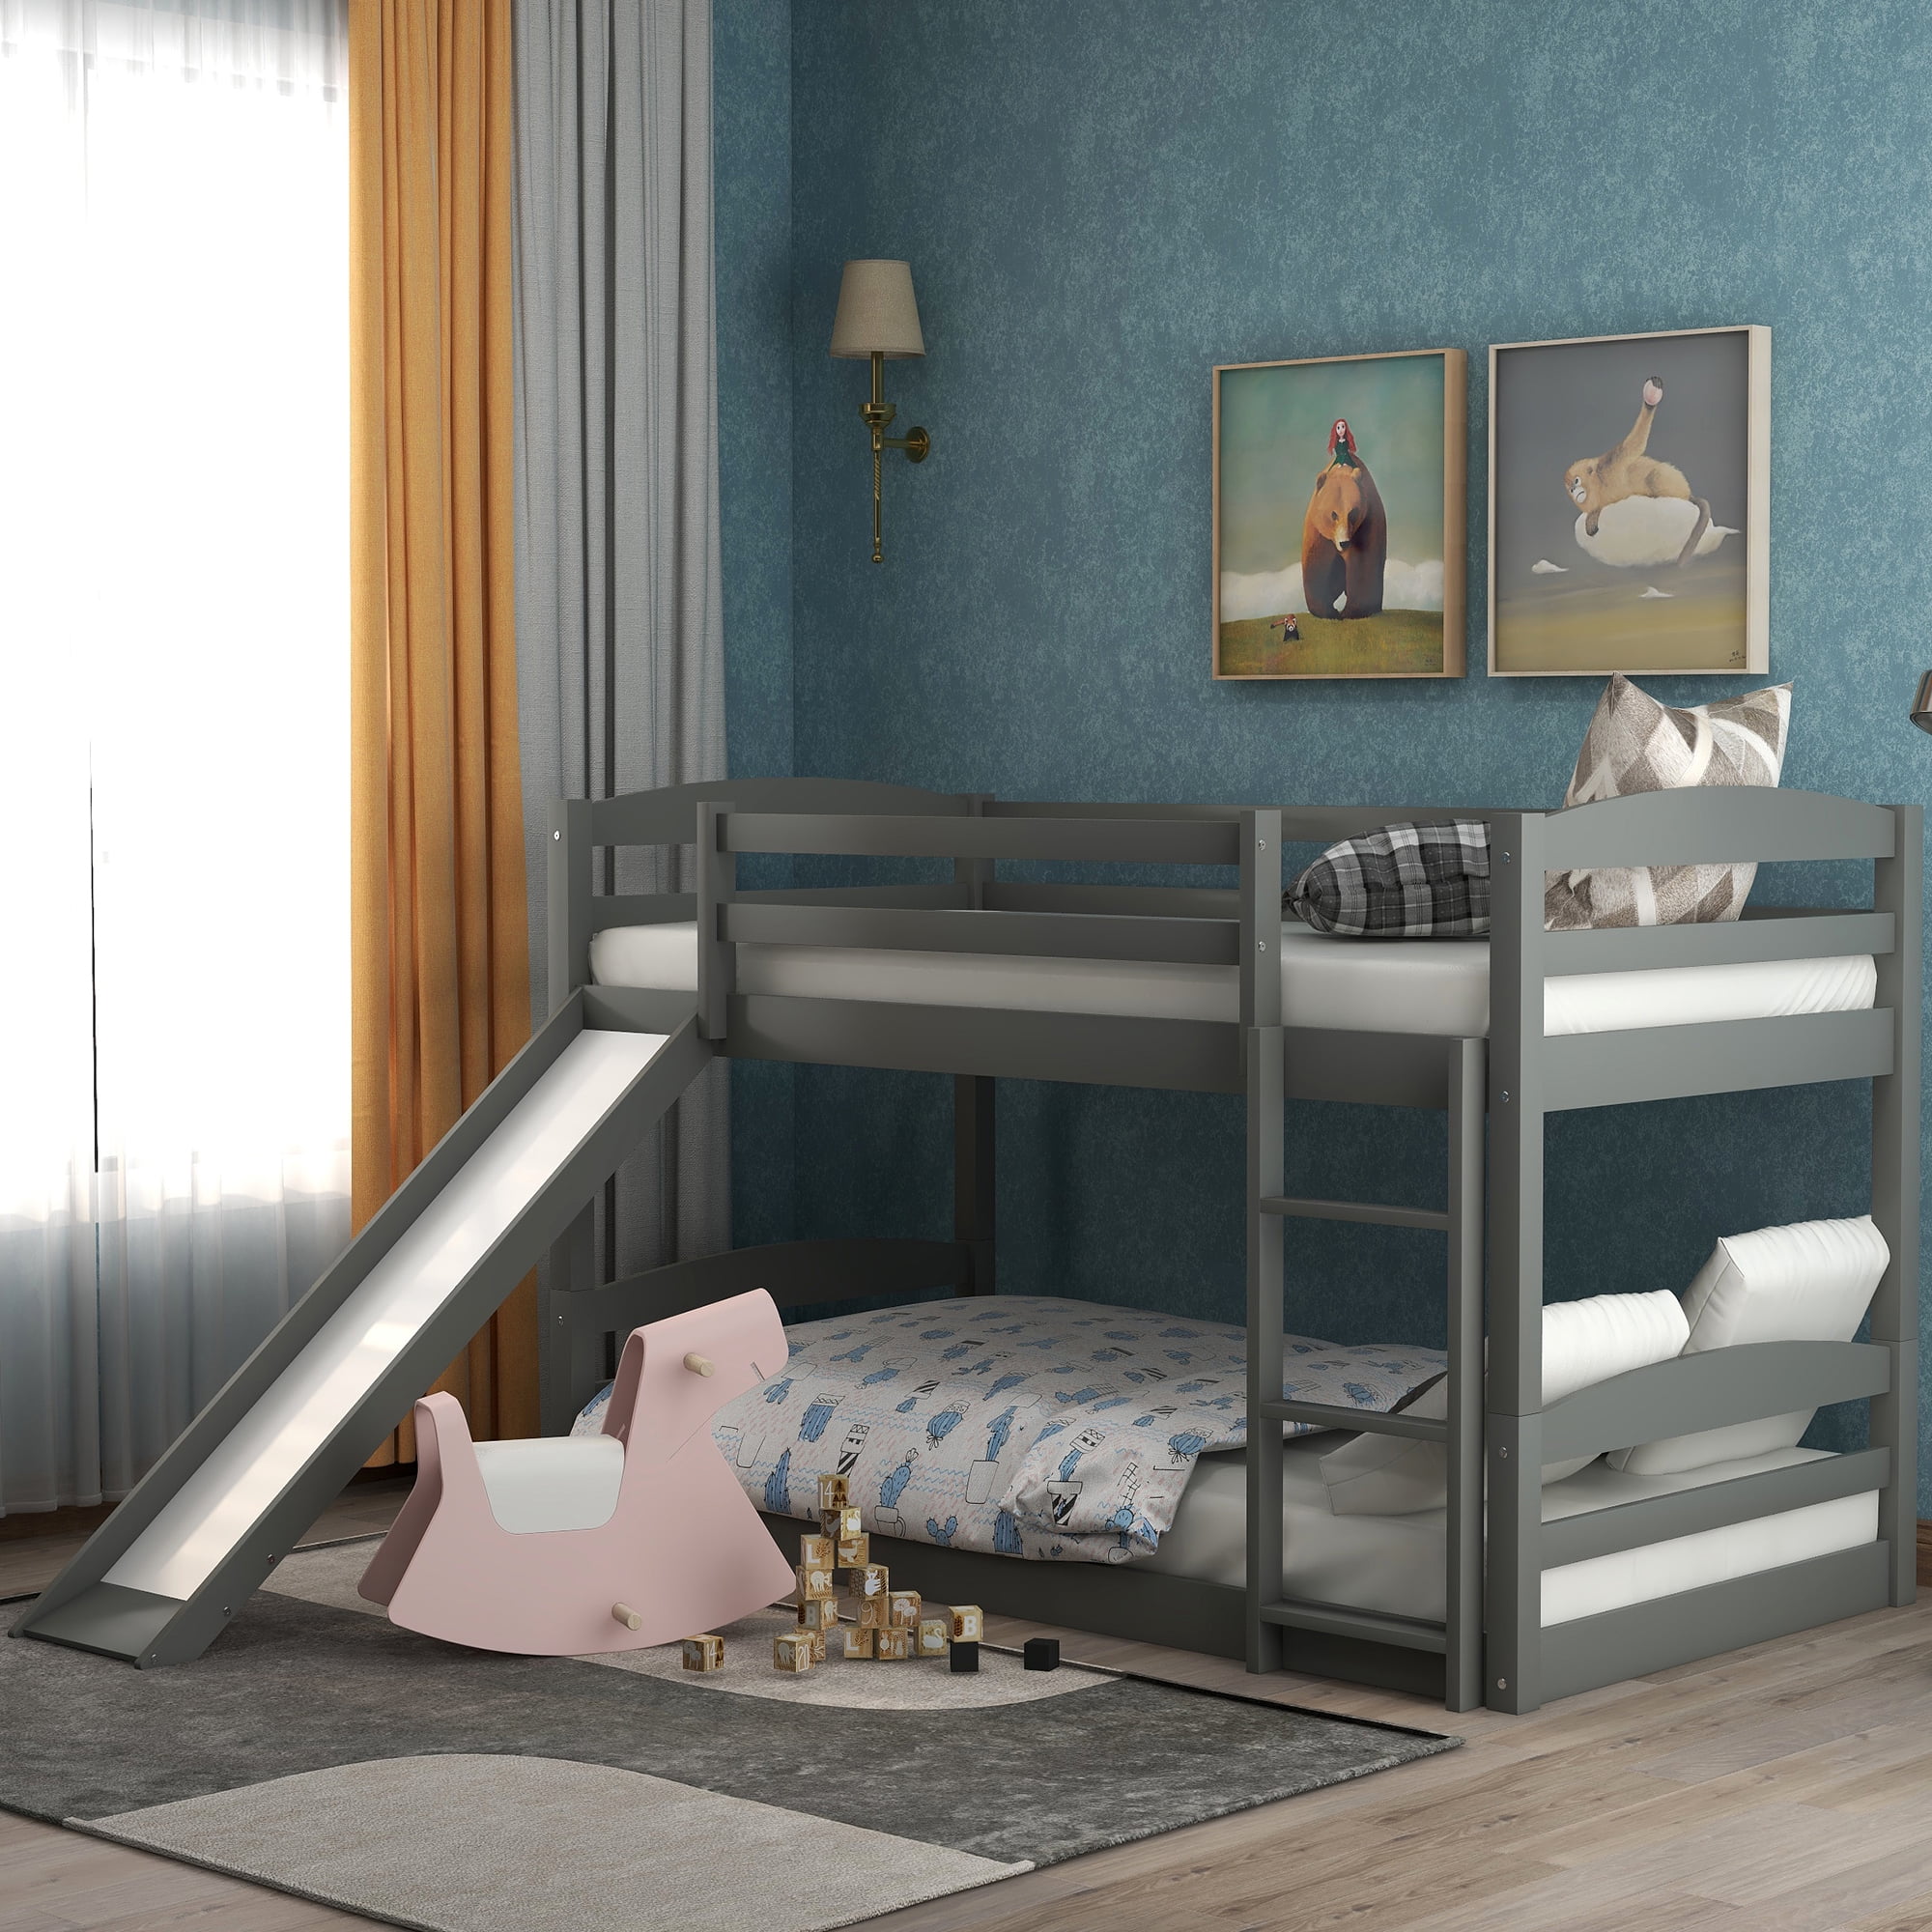 Euroco Twin Over Low Bunk Bed With, Rooms To Go Loft Bed With Slide